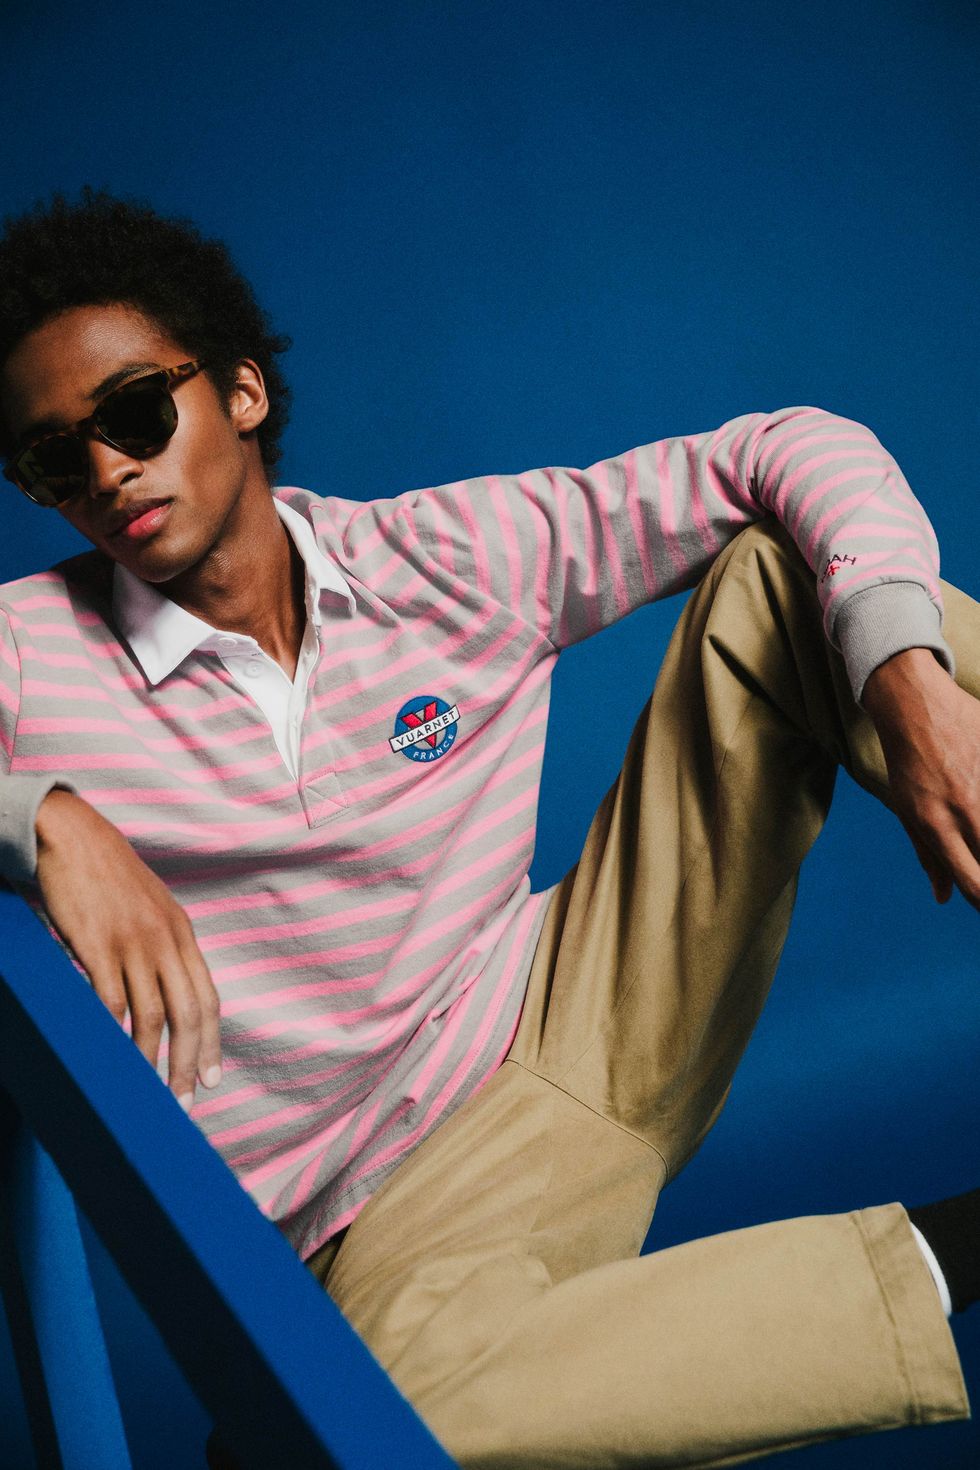 a campaign shot featuring sunglasses and a rugby shirt from noah's collaboration with vuarnet